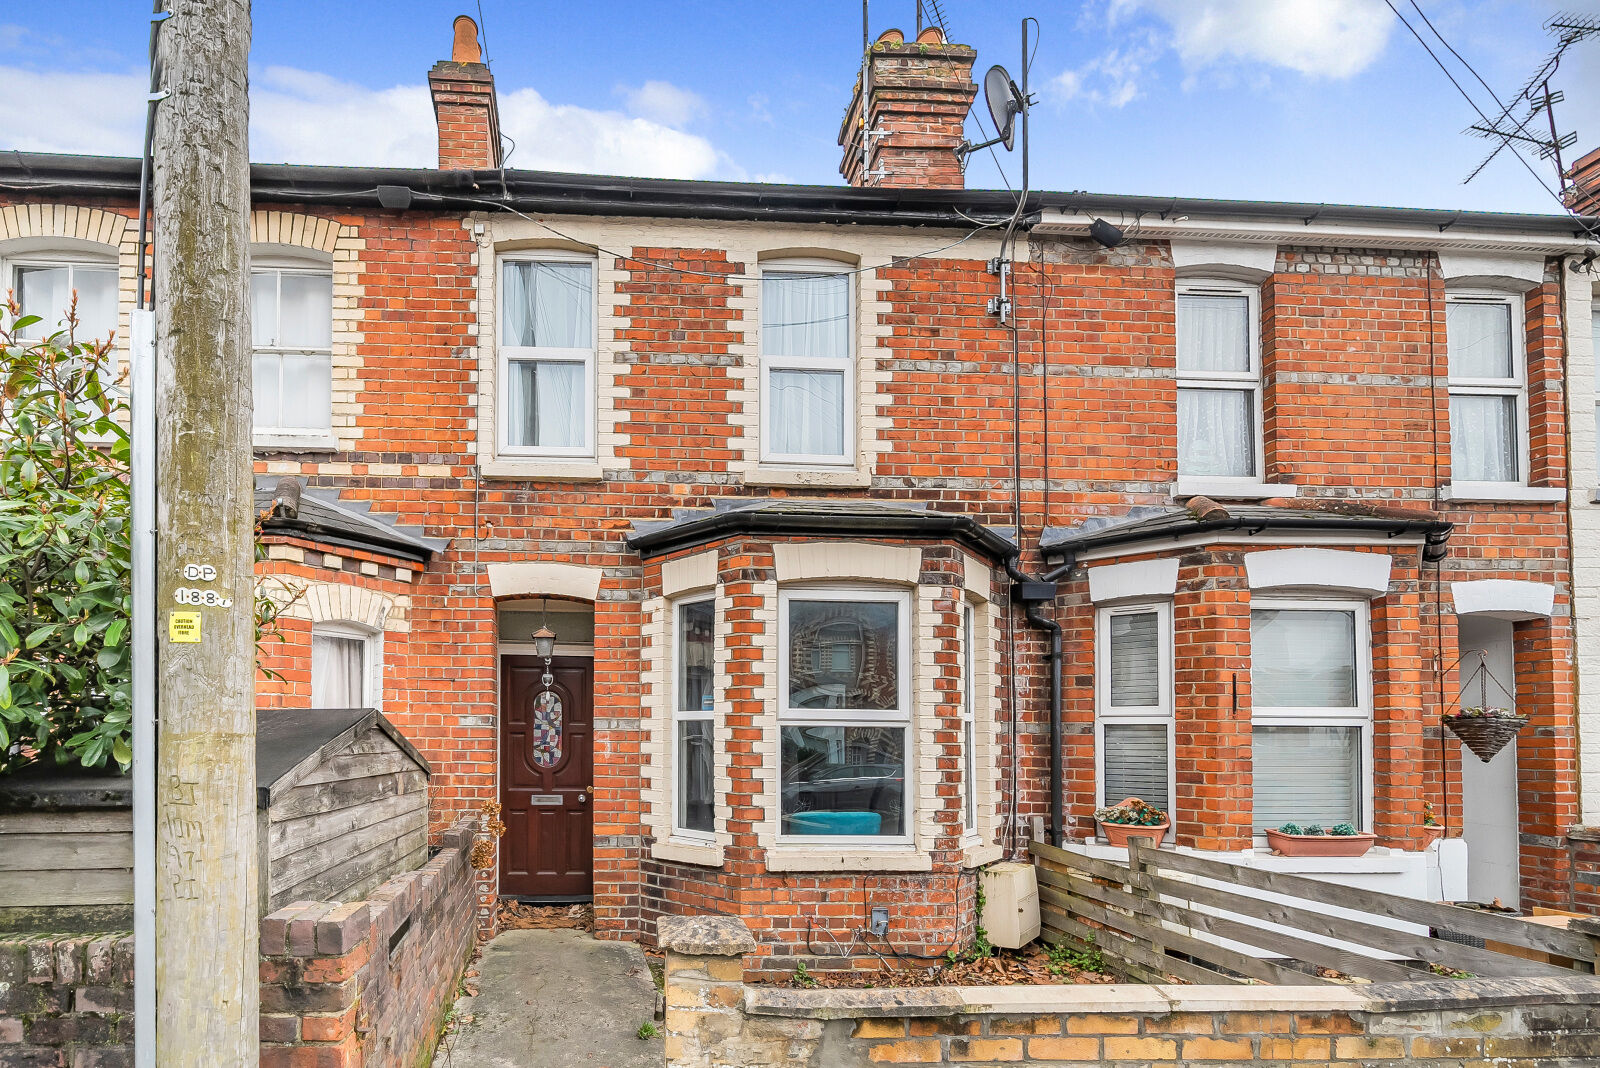 3 bedroom mid terraced house for sale Prince of Wales Avenue, Reading, RG30, main image